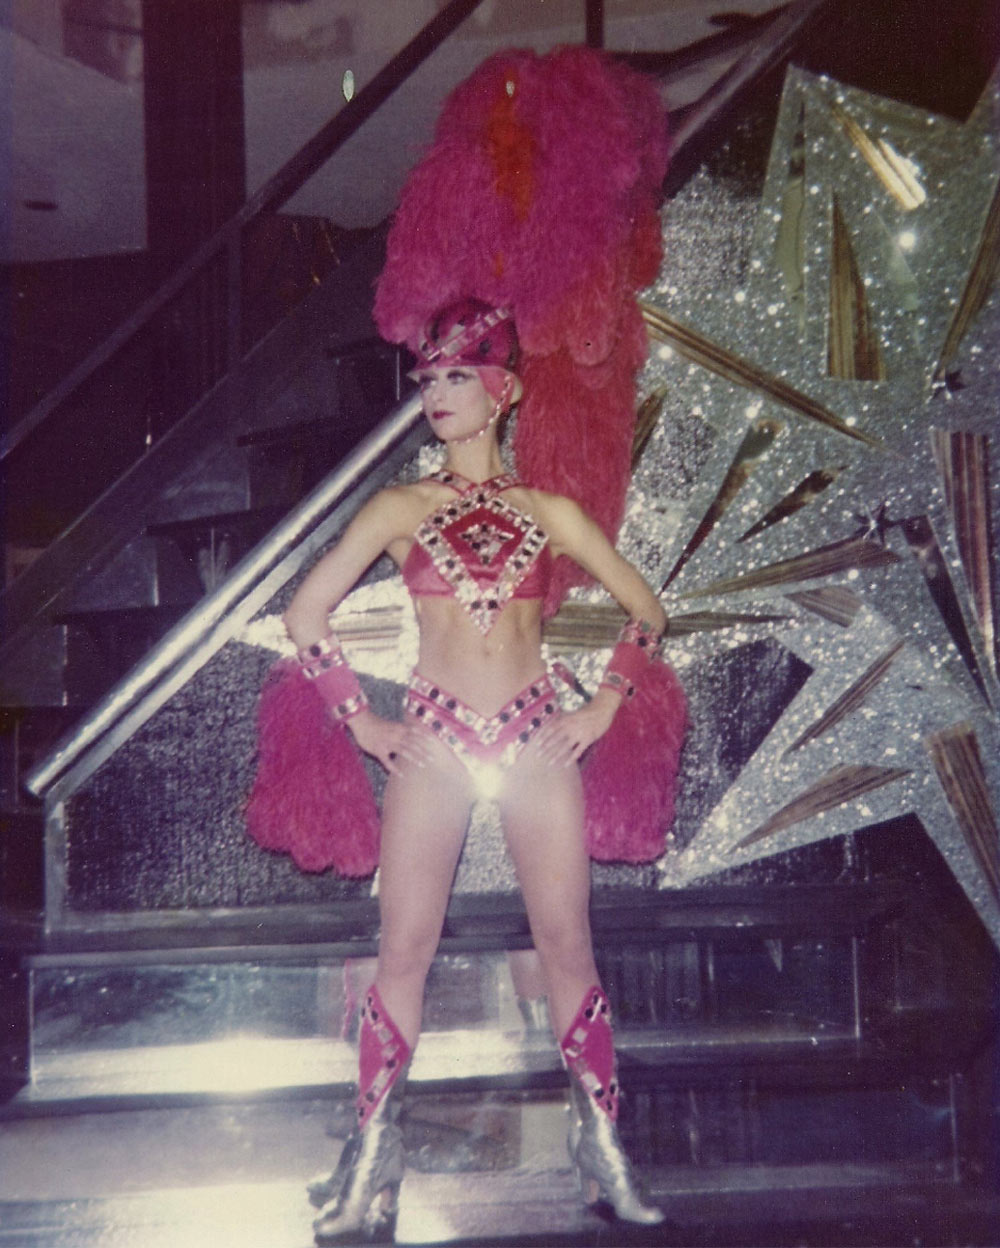 Denise Esola in her glory days as a dancer